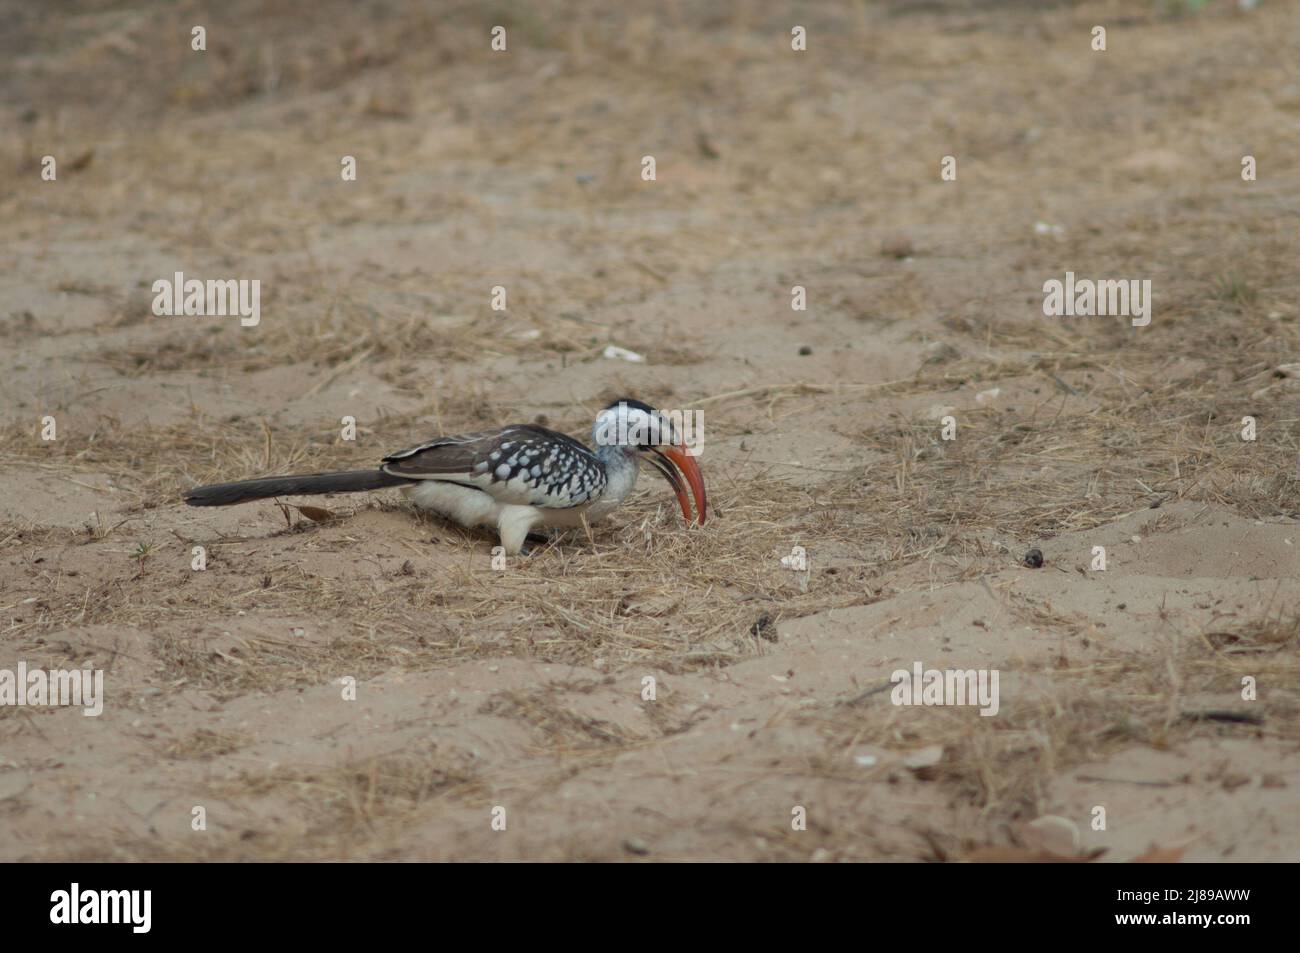 Northern red-billed hornbill Tockus erythrorhynchus kempi searching for food. Langue de Barbarie National Park. Saint-Louis. Senegal. Stock Photo